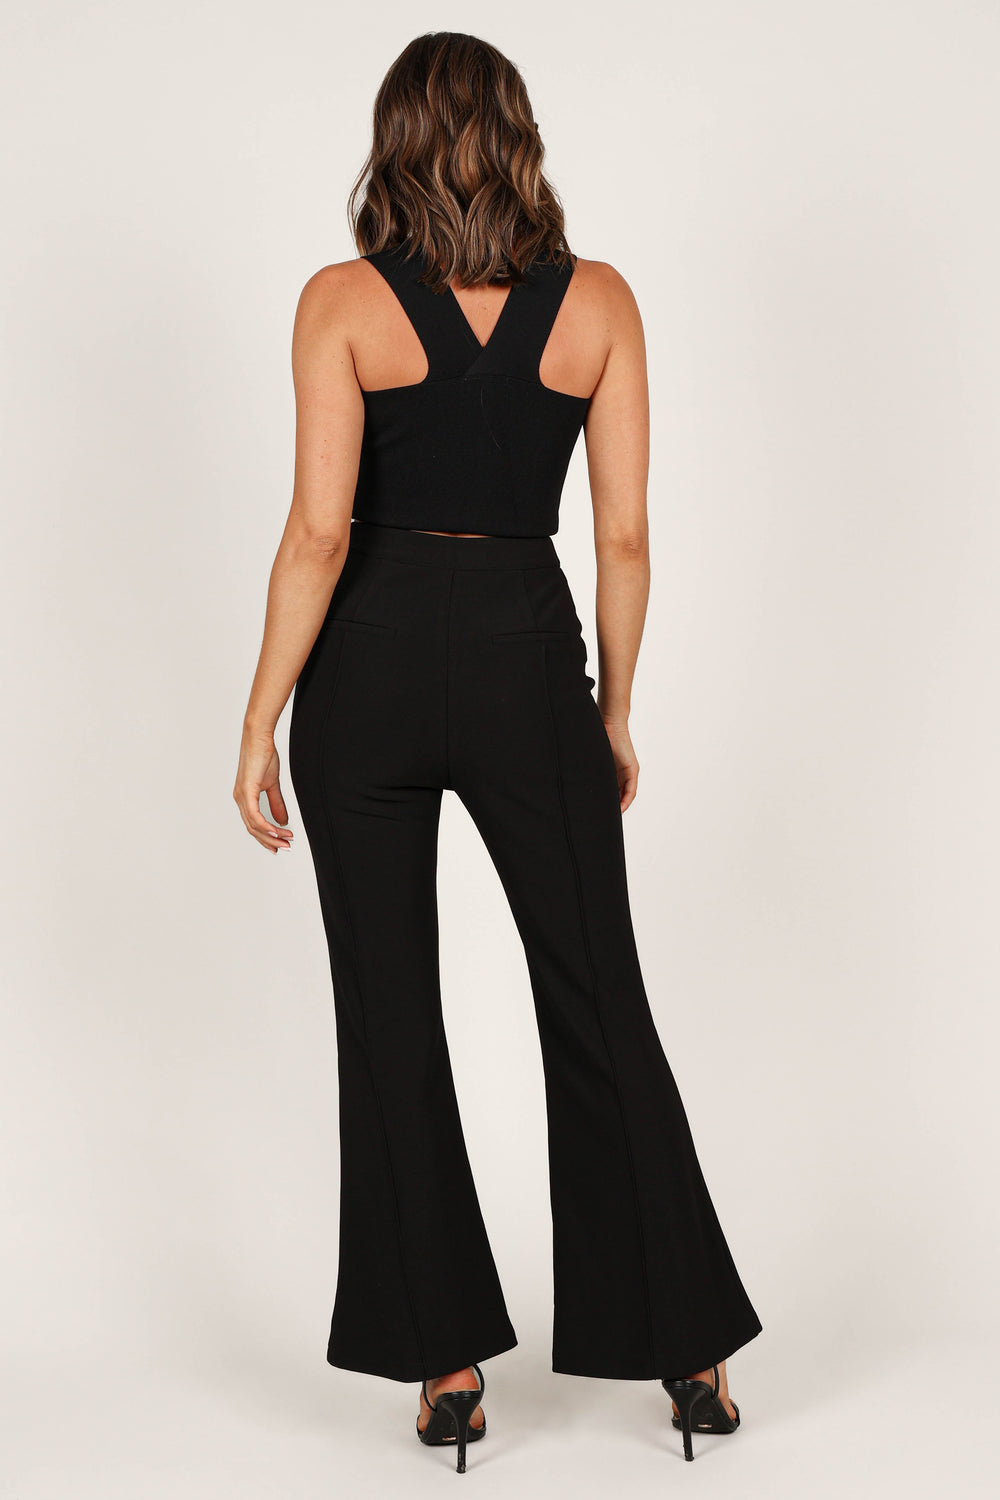 BOTTOMS @Rutherford Flared Ponte Pant - Black